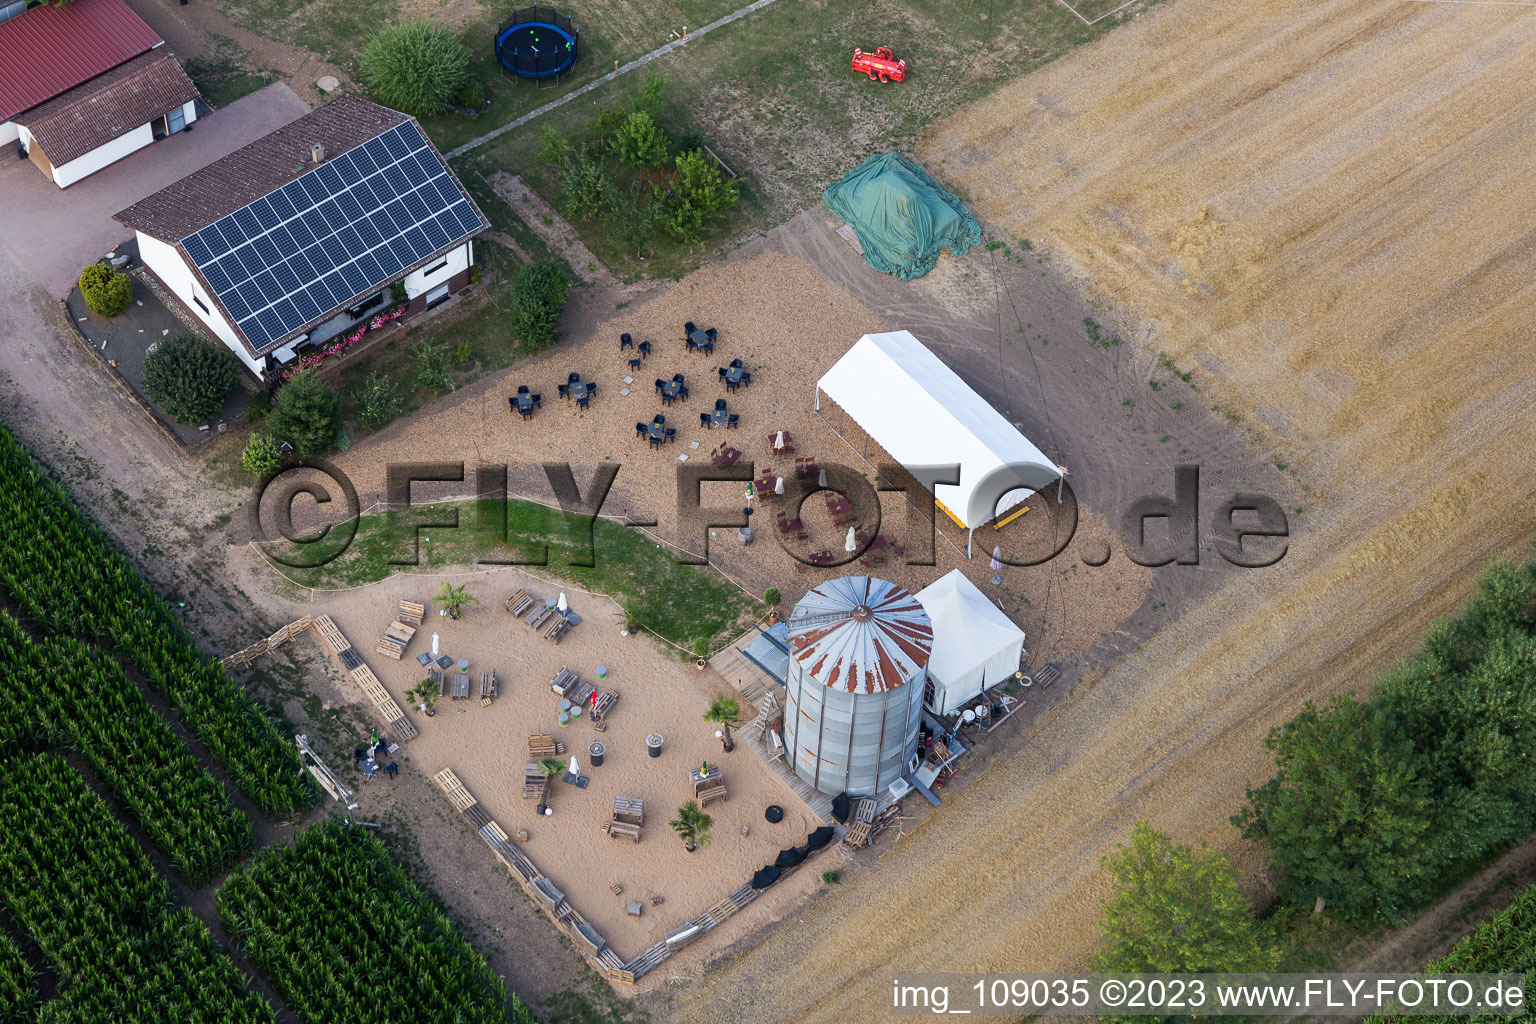 Drone recording of Corn maze at Seehof in Steinweiler in the state Rhineland-Palatinate, Germany